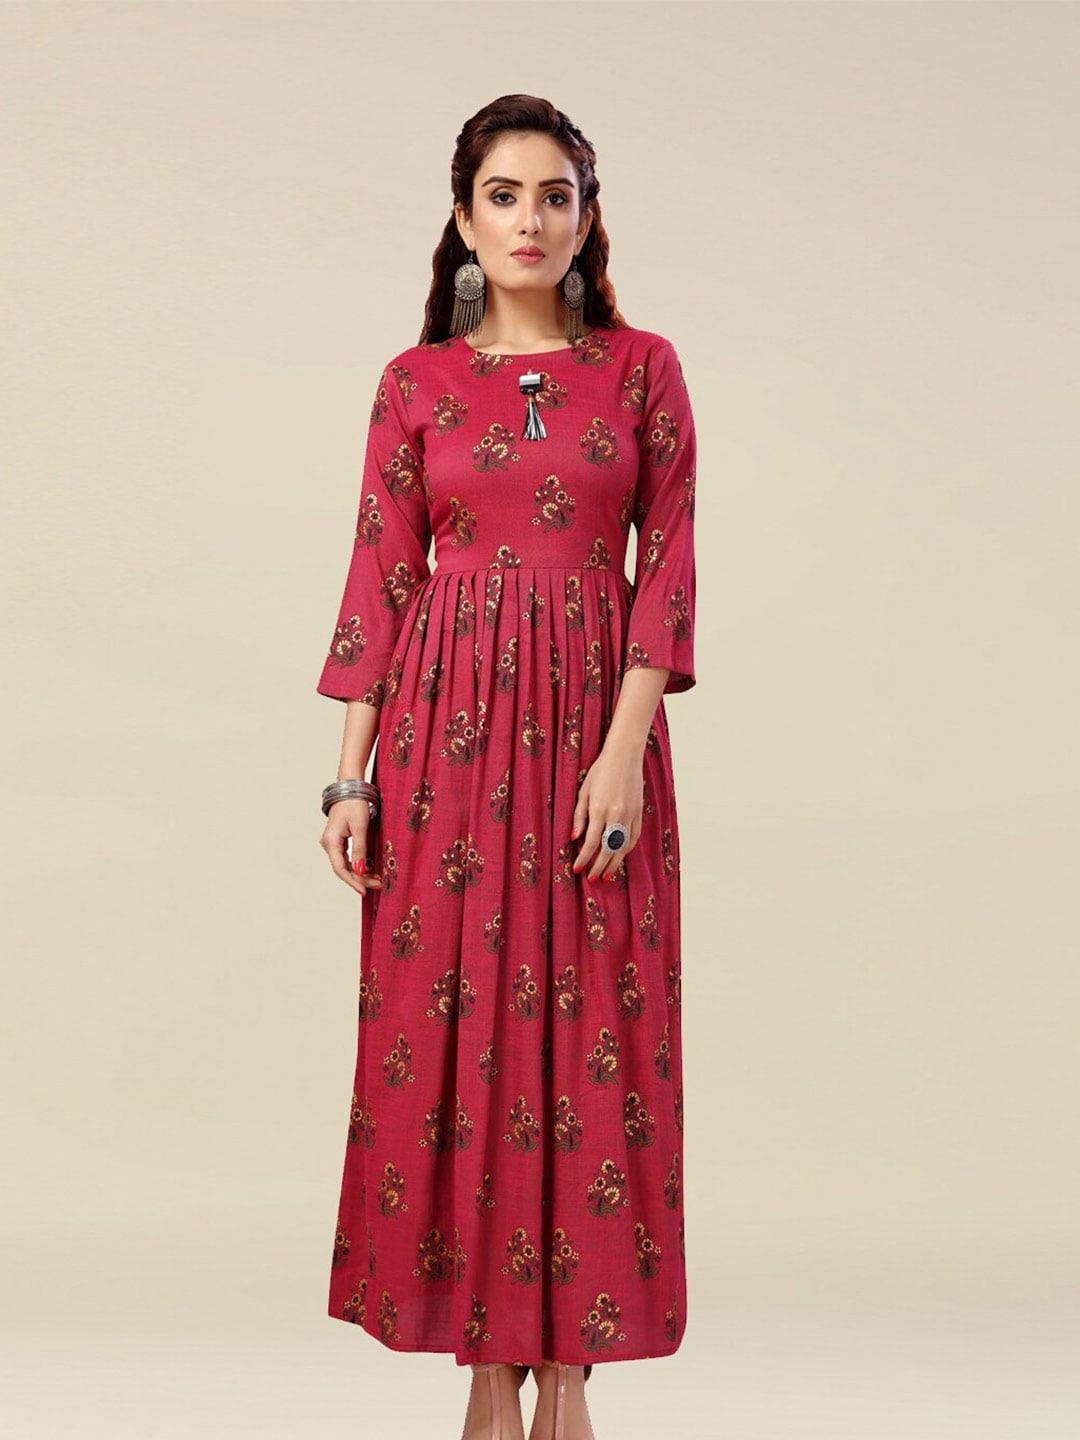 MADHURAM Ethnic Motif Printed Pleated Maxi Fit And Flare Ethnic Dress